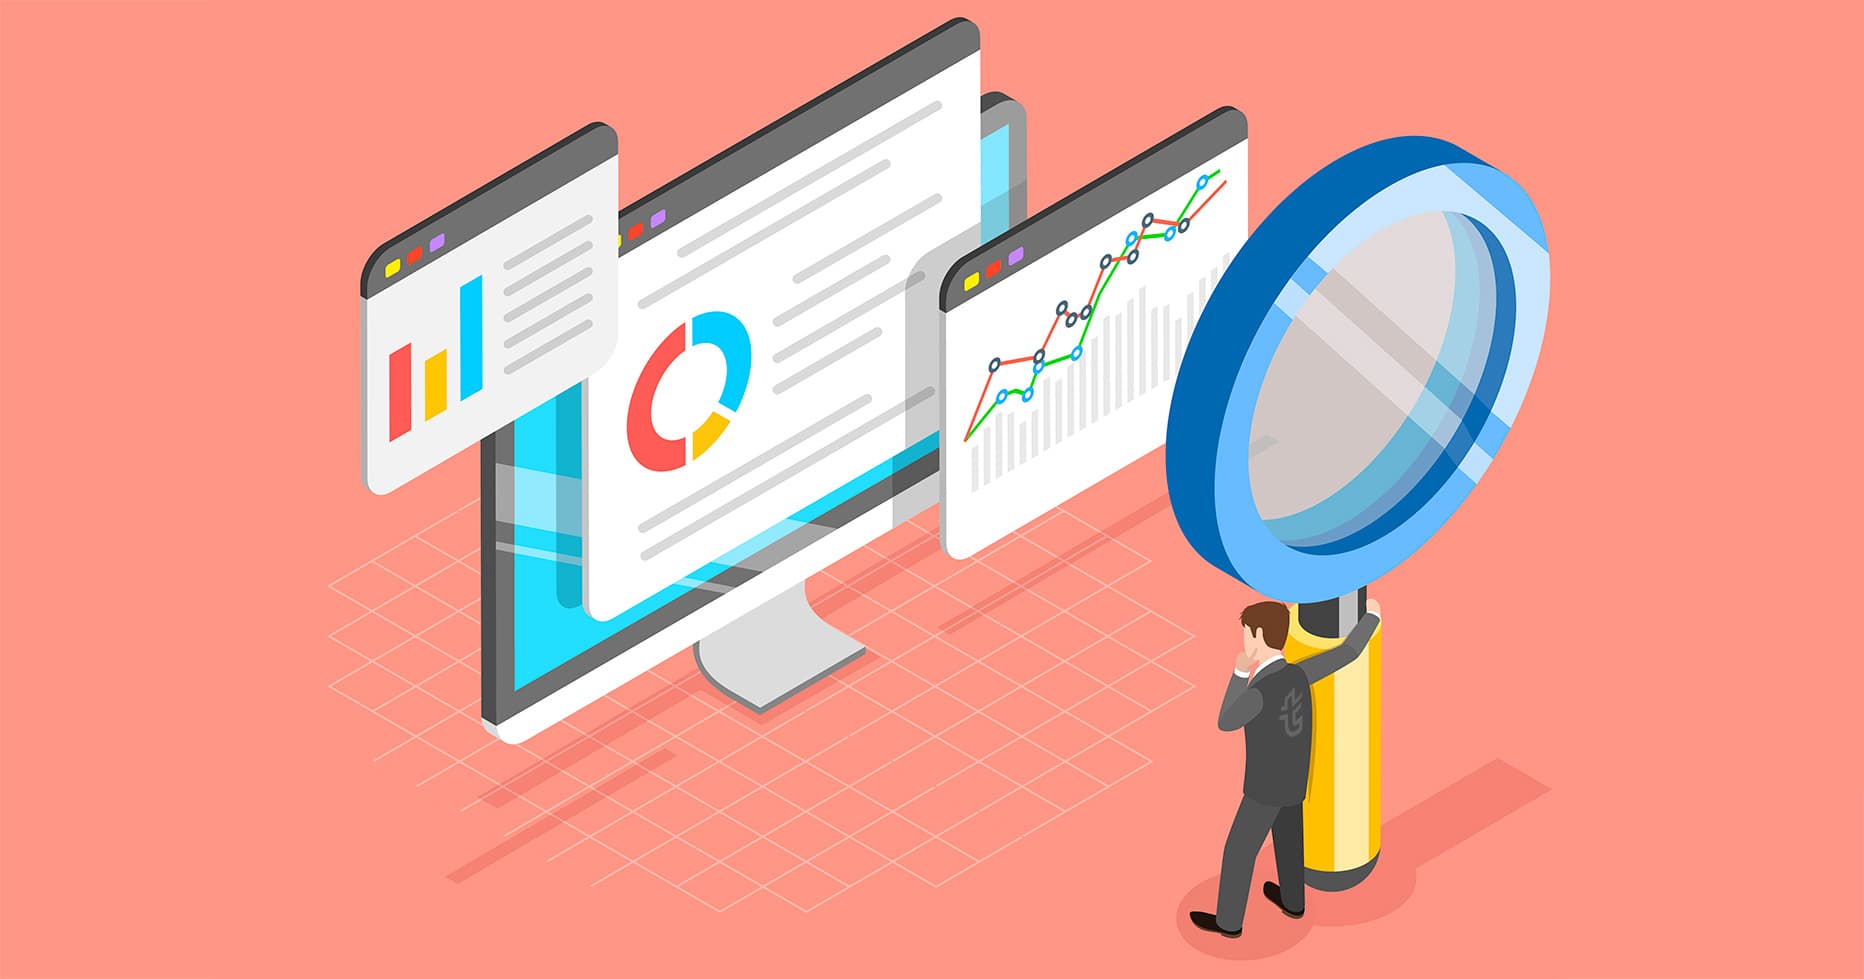 best seo tools to grow your website traffic